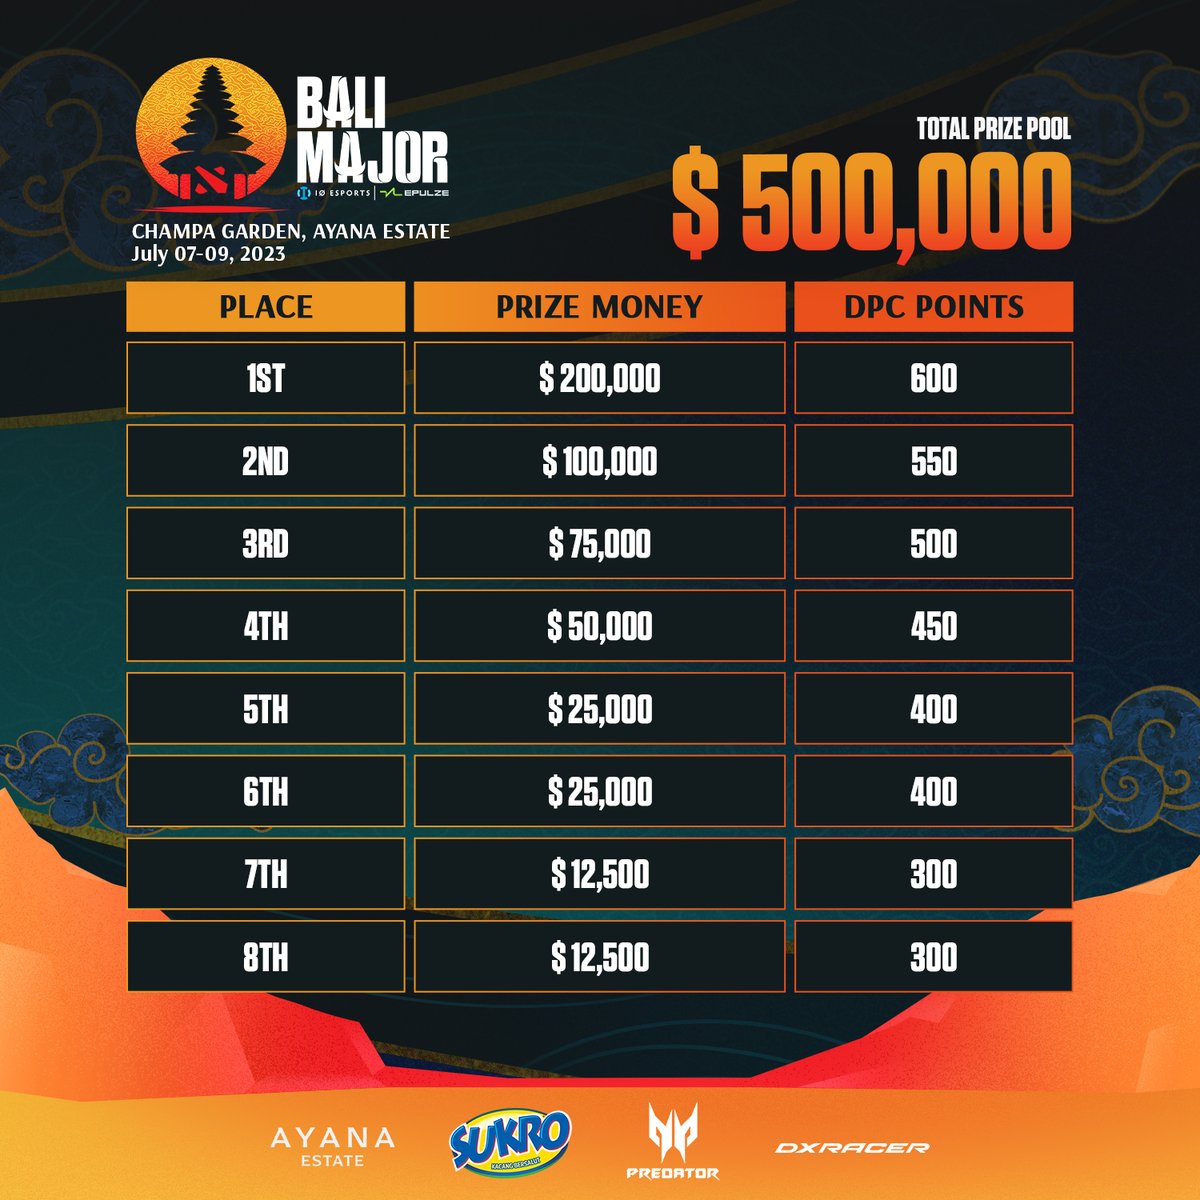 500,000 Dollars  and 3500 DPC Points on the line 🤑🤑

18 teams battle it out in Bali to secure their spot in The International 😮😮

Who'll come out on top?

#WhereLandMeetsSea